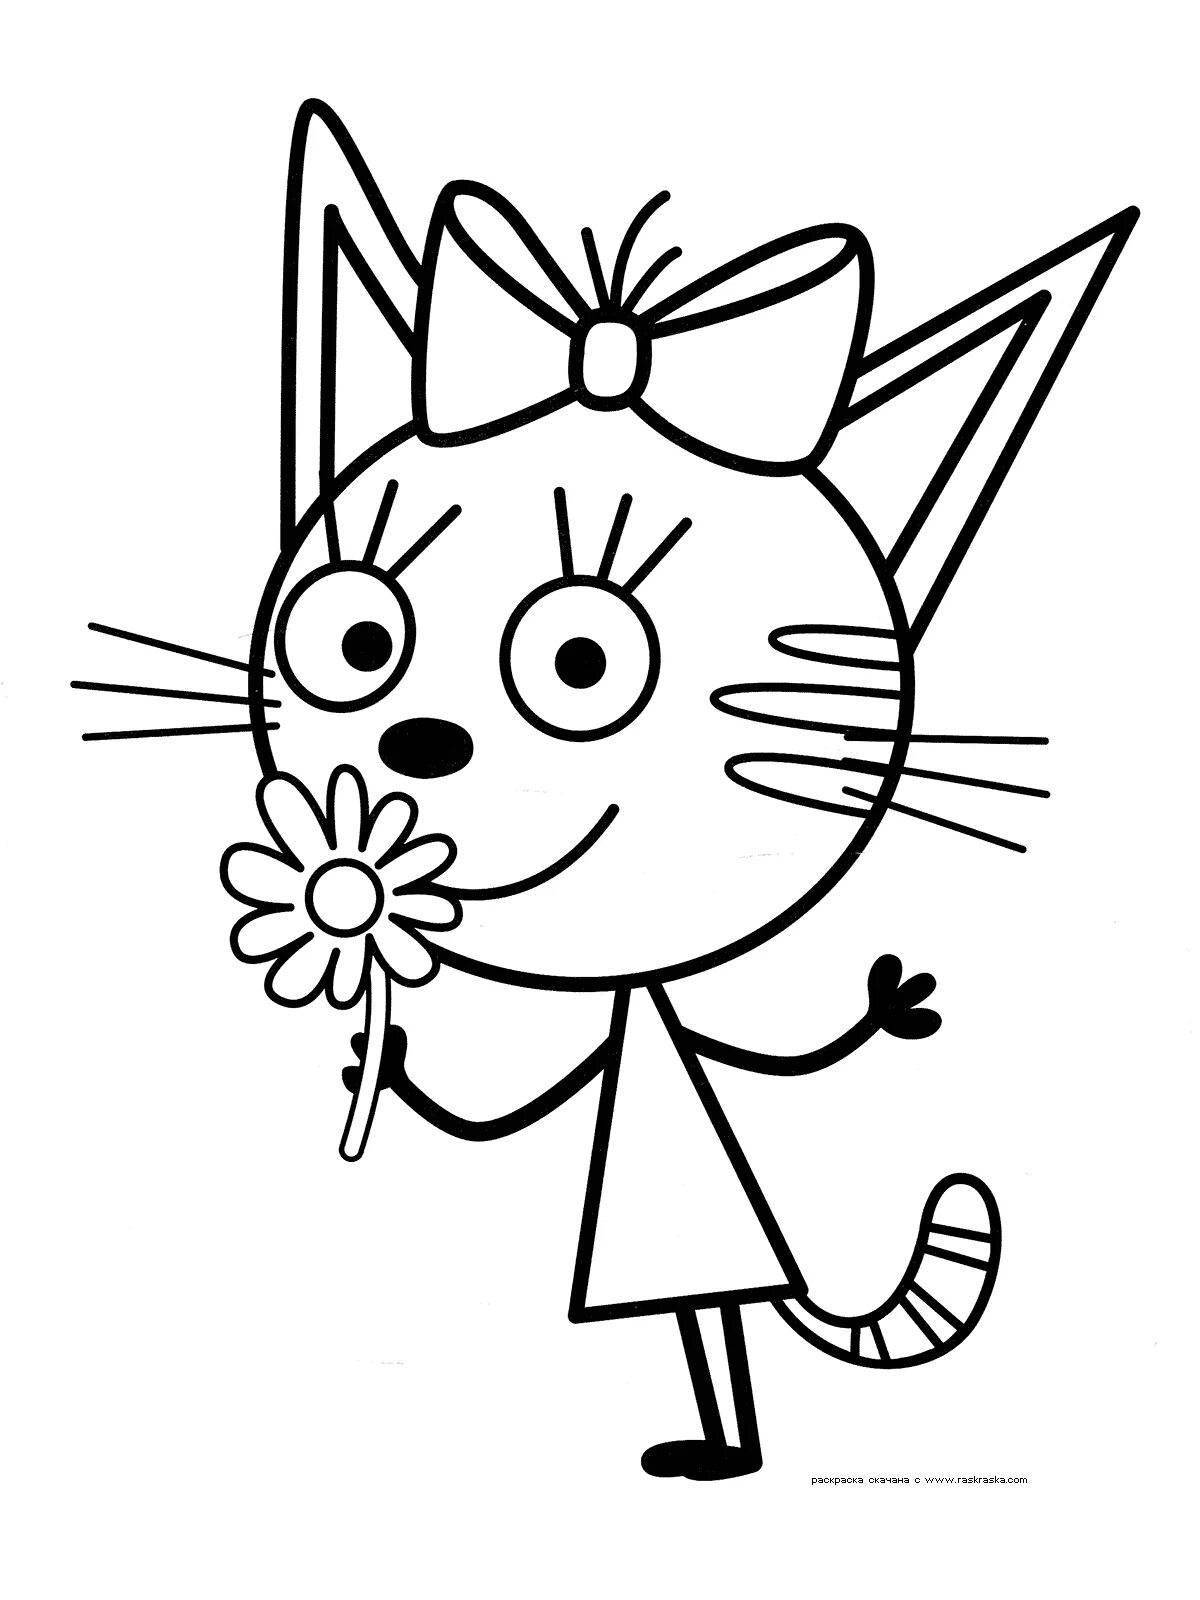 Wonderful 3 cats coloring book for kids